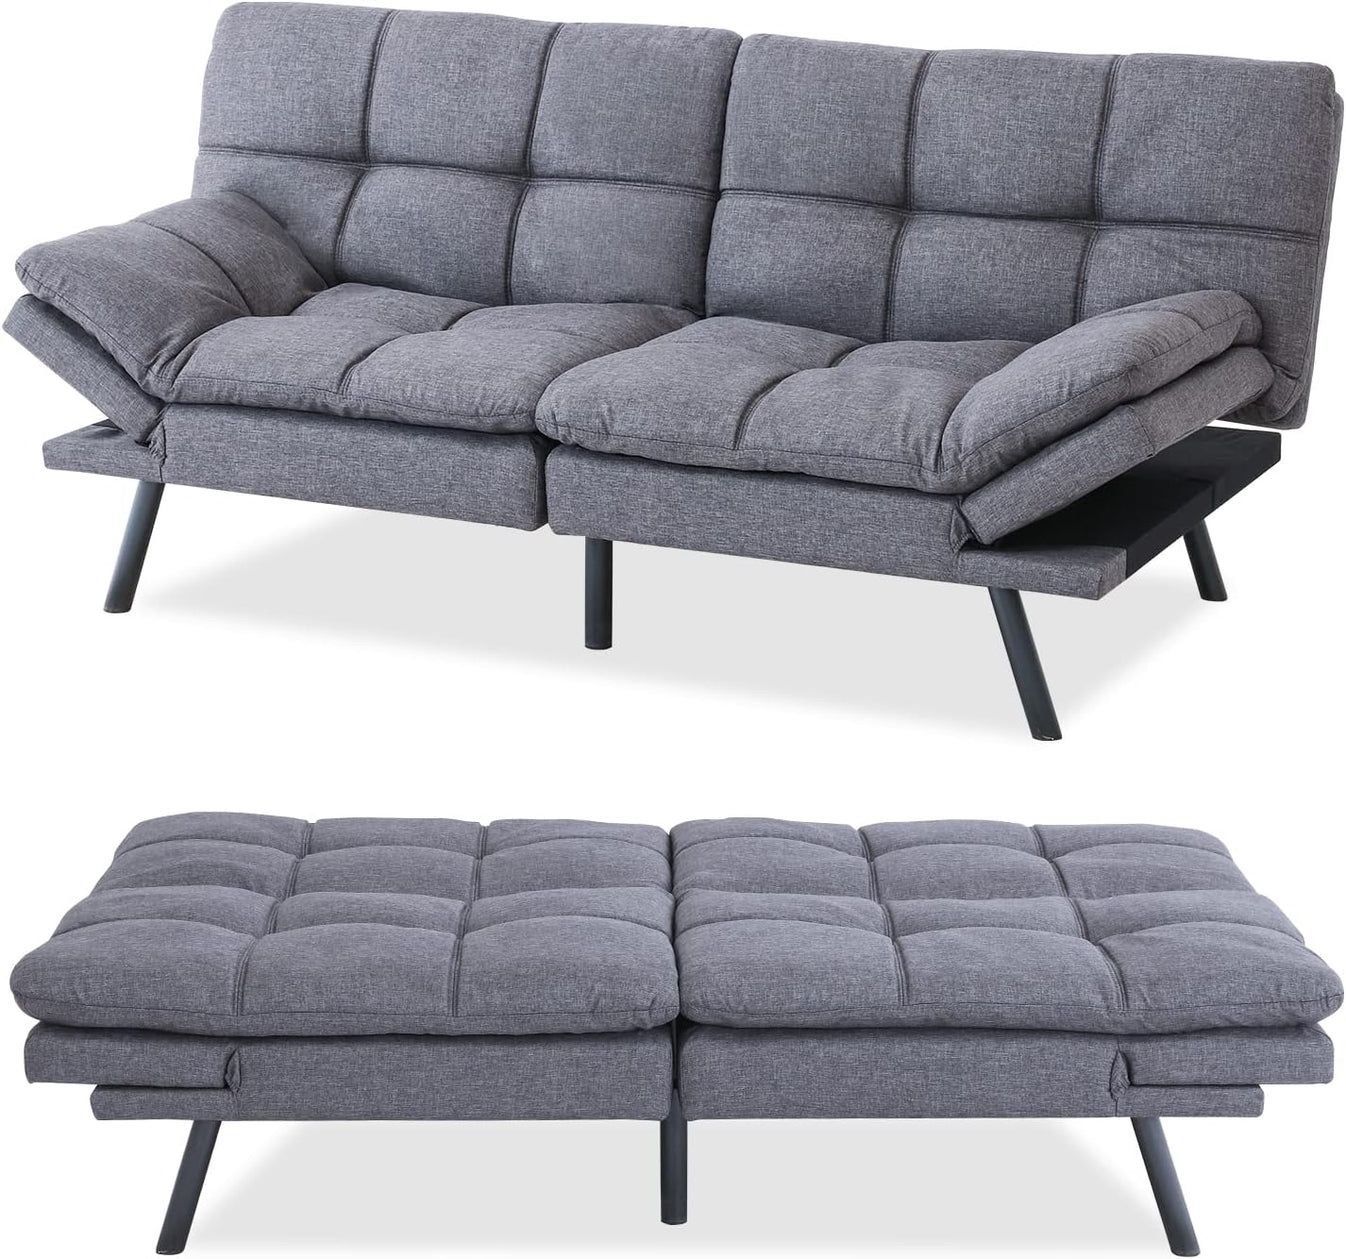 Hcore Convertible Sleeper, Memory Foam Futon Couch,Loveseat Bed,Small Splitback Modern Sofa Sofabed, Upgraded Grey - Retail $322 